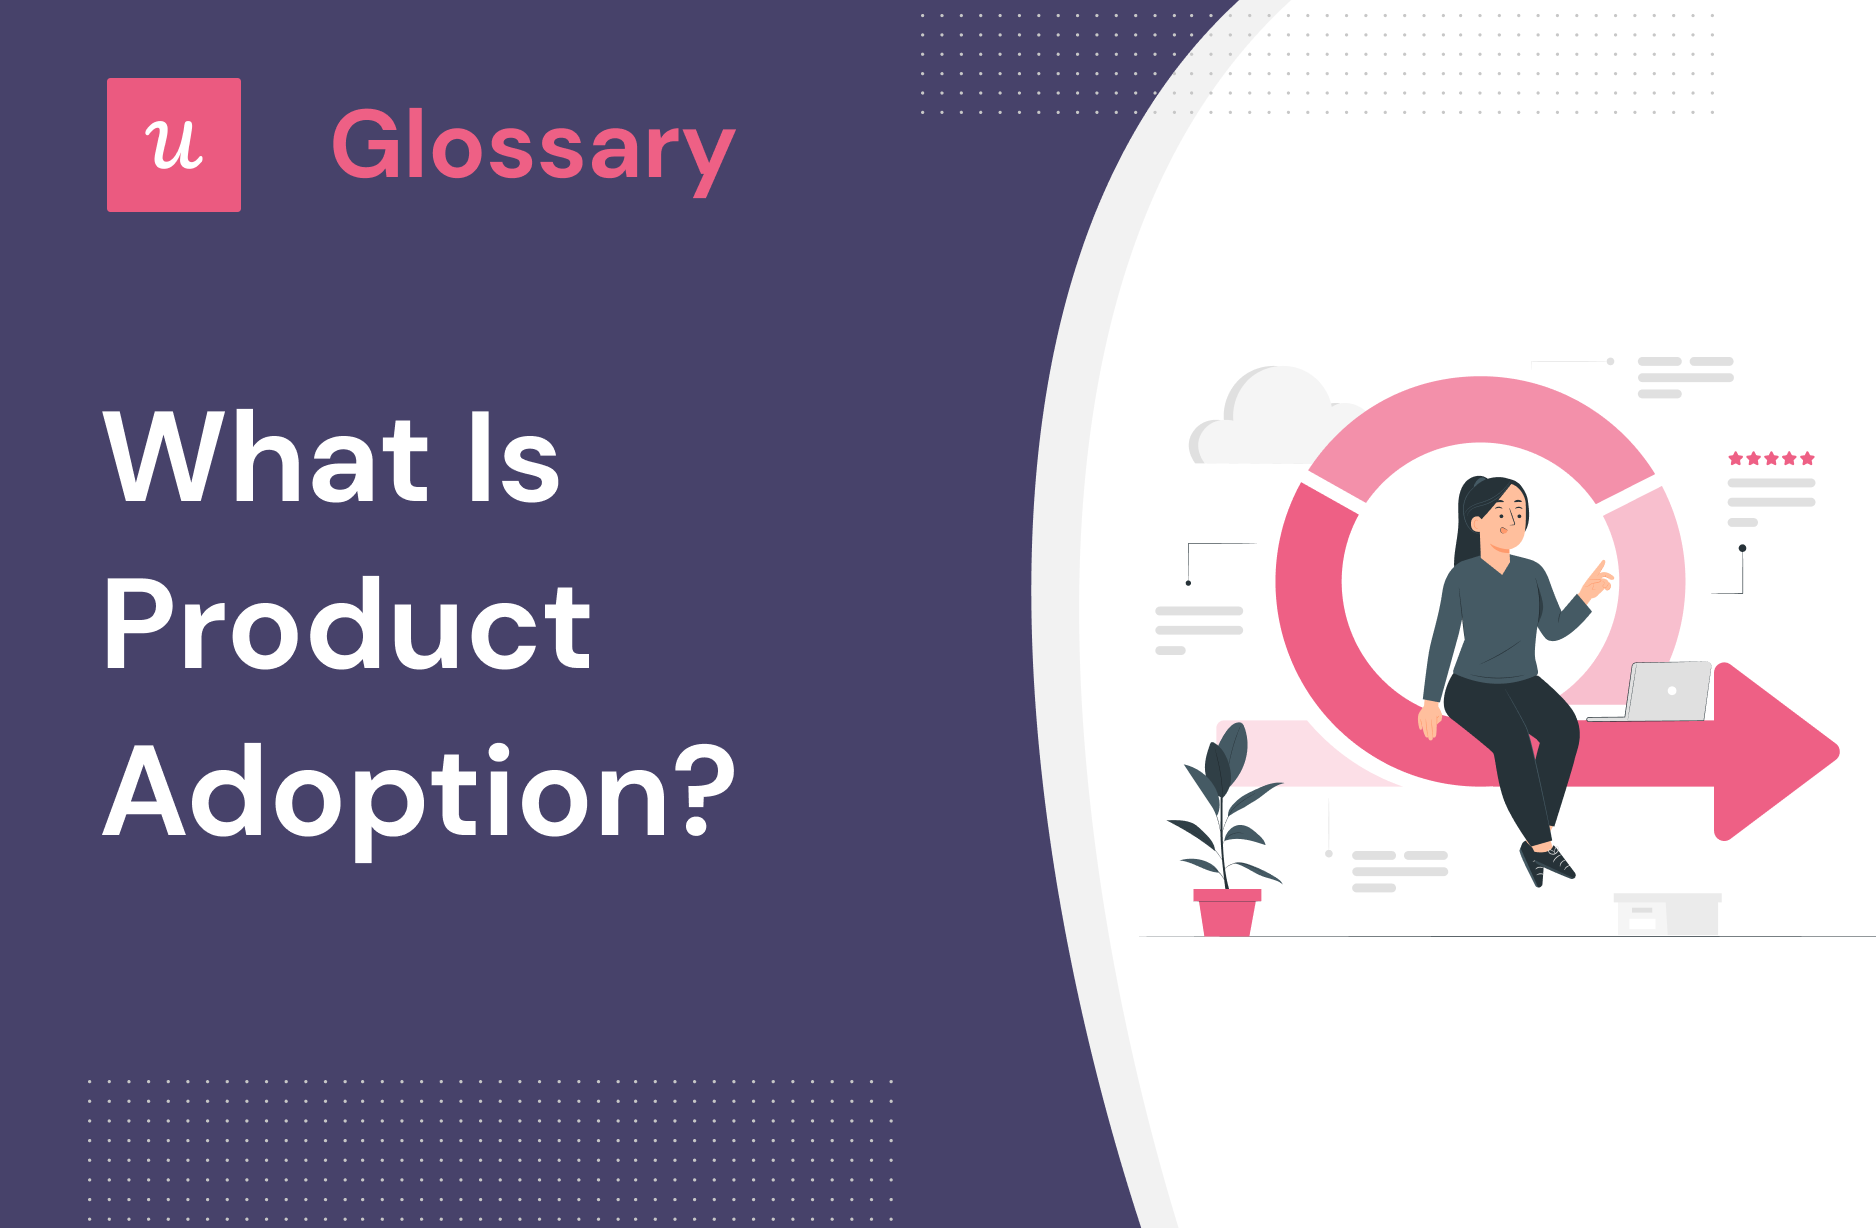 What is Product Adoption?